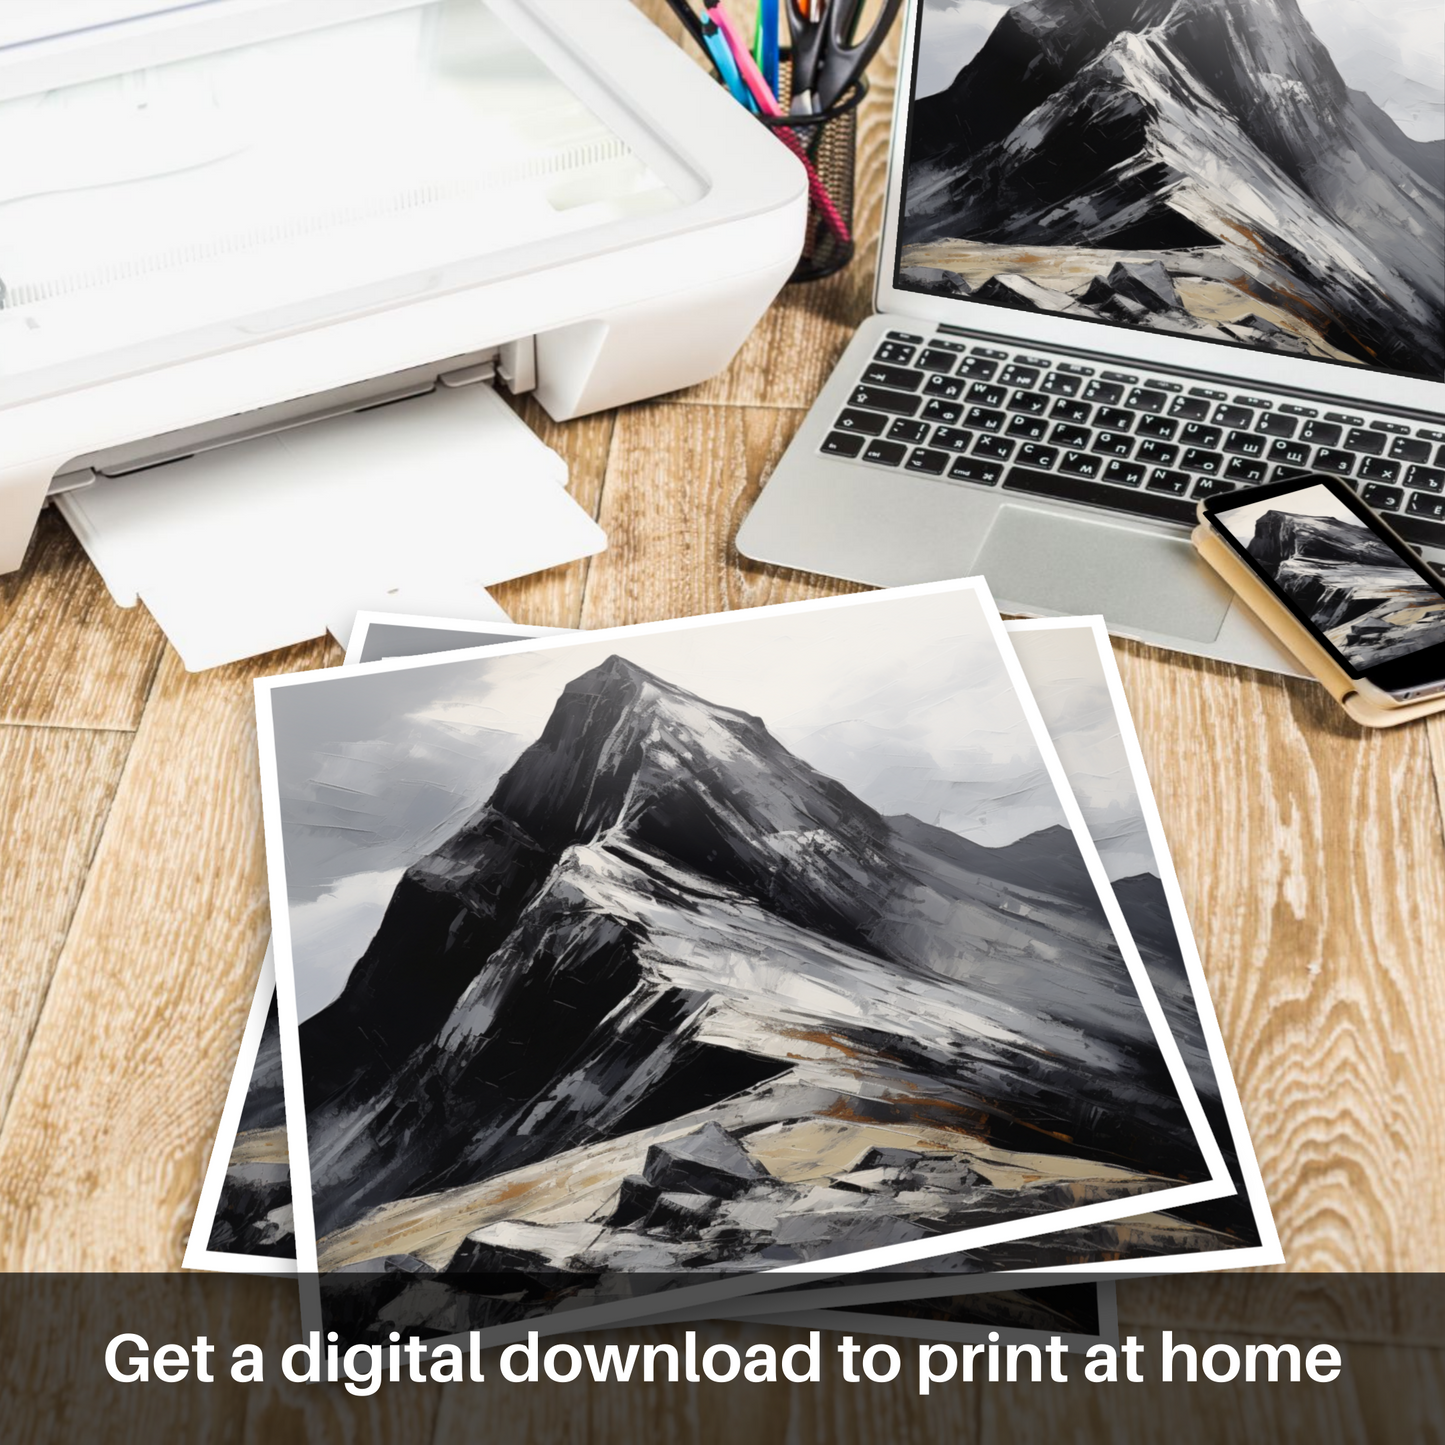 Downloadable and printable picture of Sgurr Dearg, Highlands